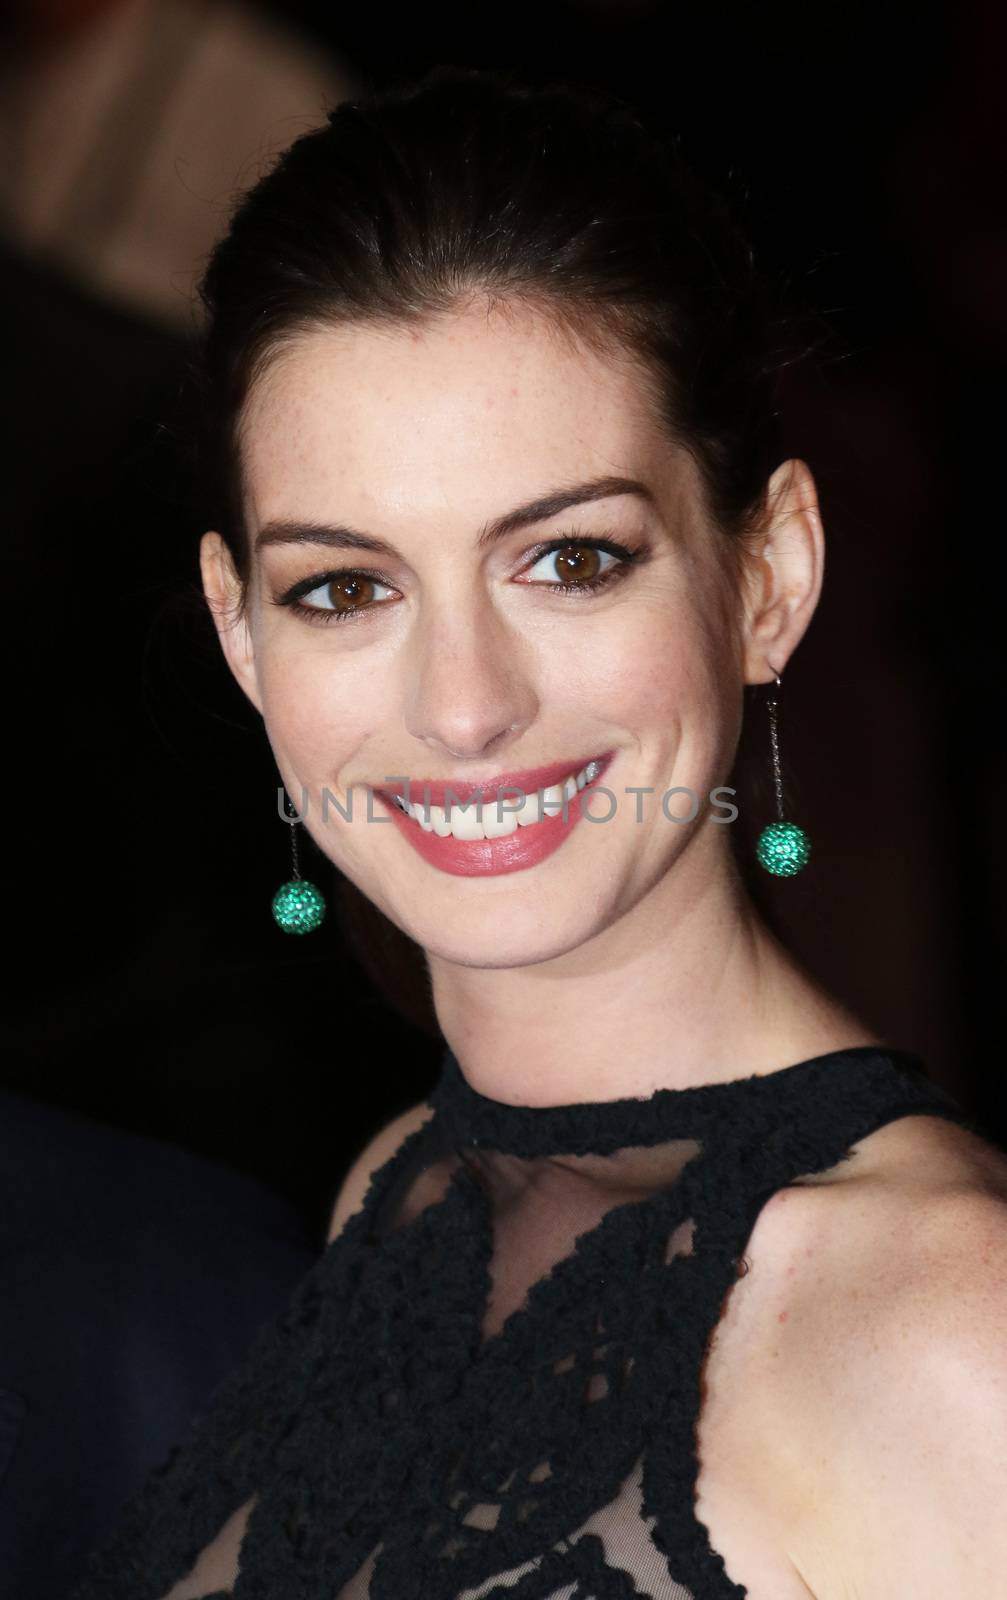 UNITED KINGDOM, London: Anne Hathaway attends the European premiere of The Intern at Leicester Square, London on September 27, 2015.